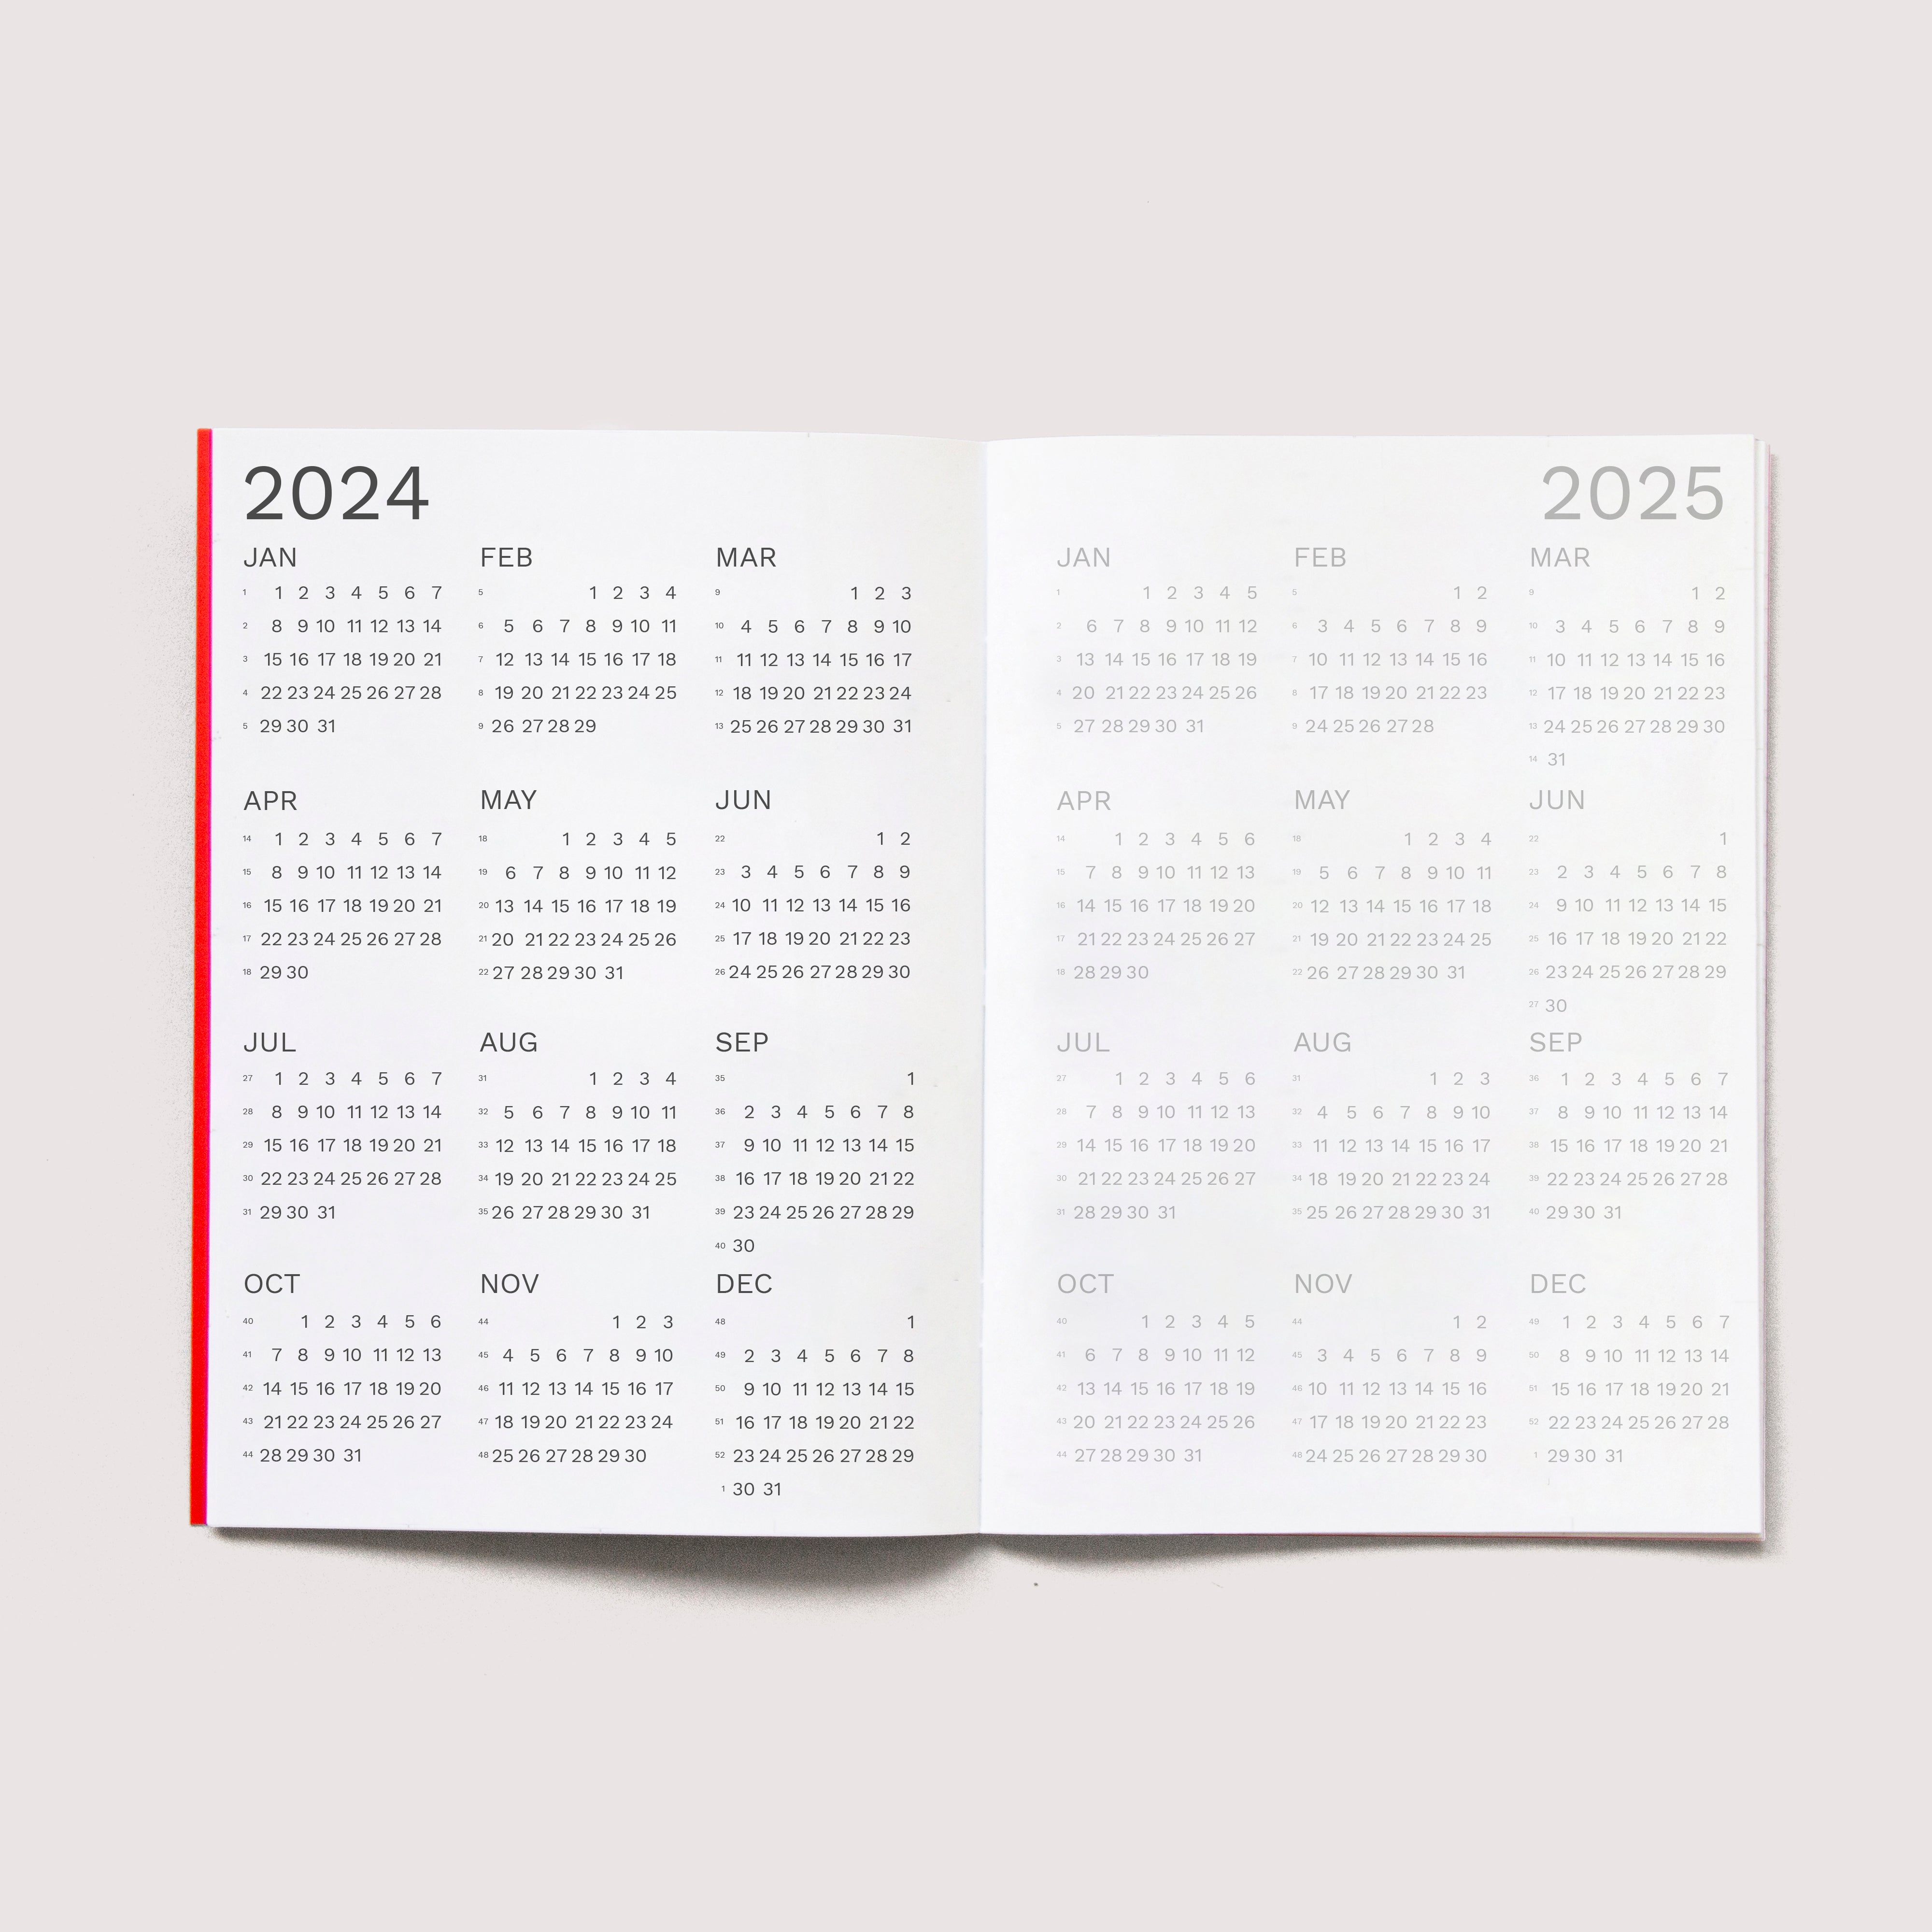 OCTÀGON DESIGN | "2024 Monthly Planner A4 size" Monthly planner. 2024 - 2025 calendars template.